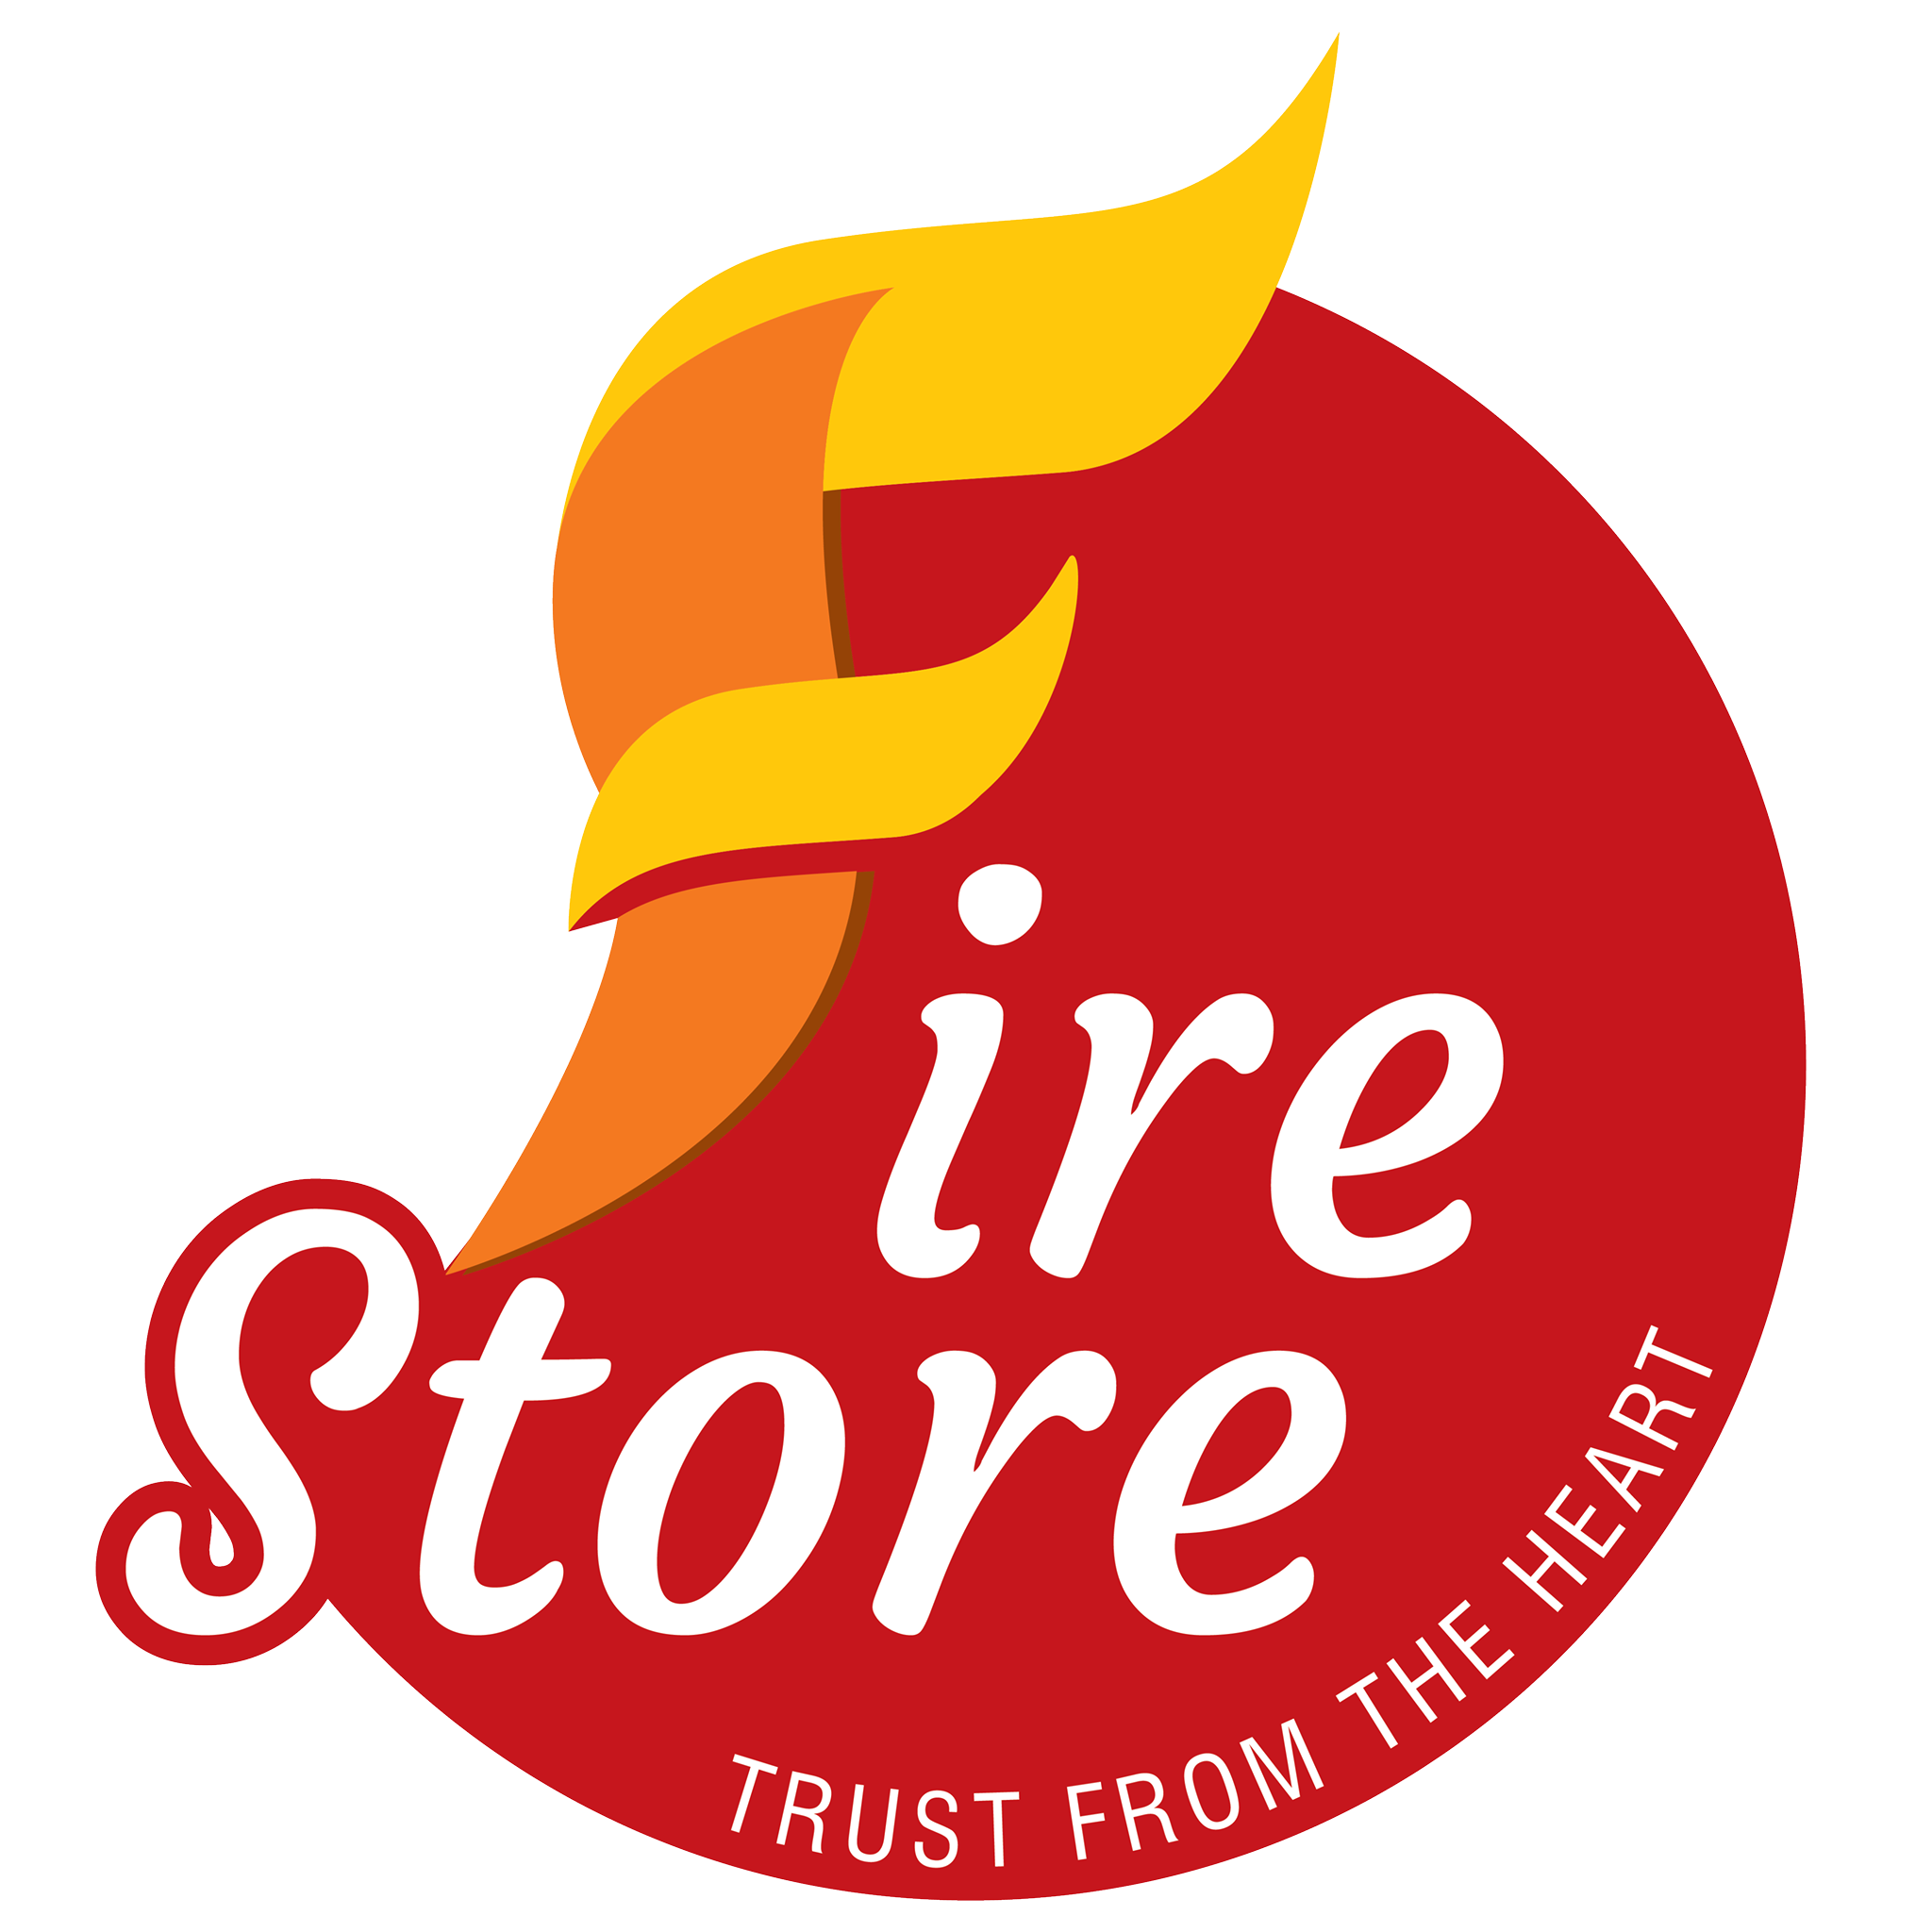 Fire Store